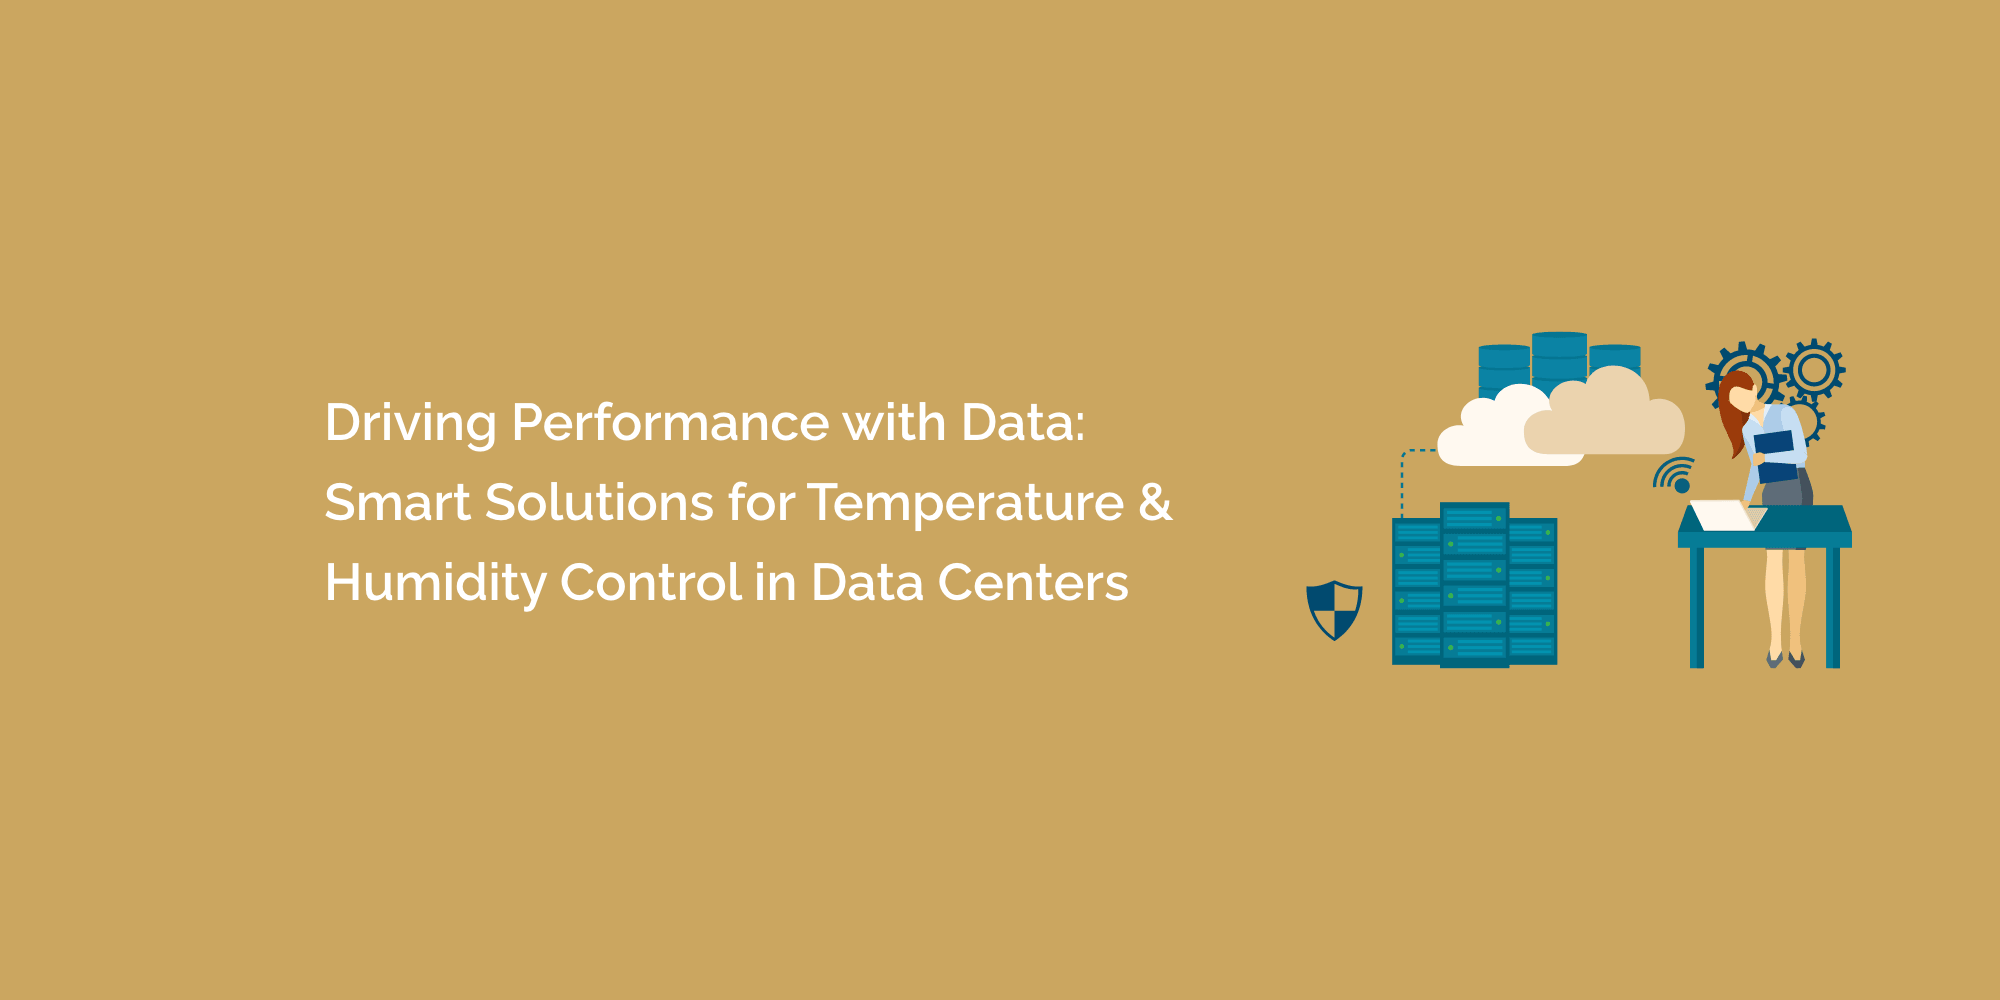 Driving Performance with Data: Smart Solutions for Temperature and Humidity Control in Data Centers